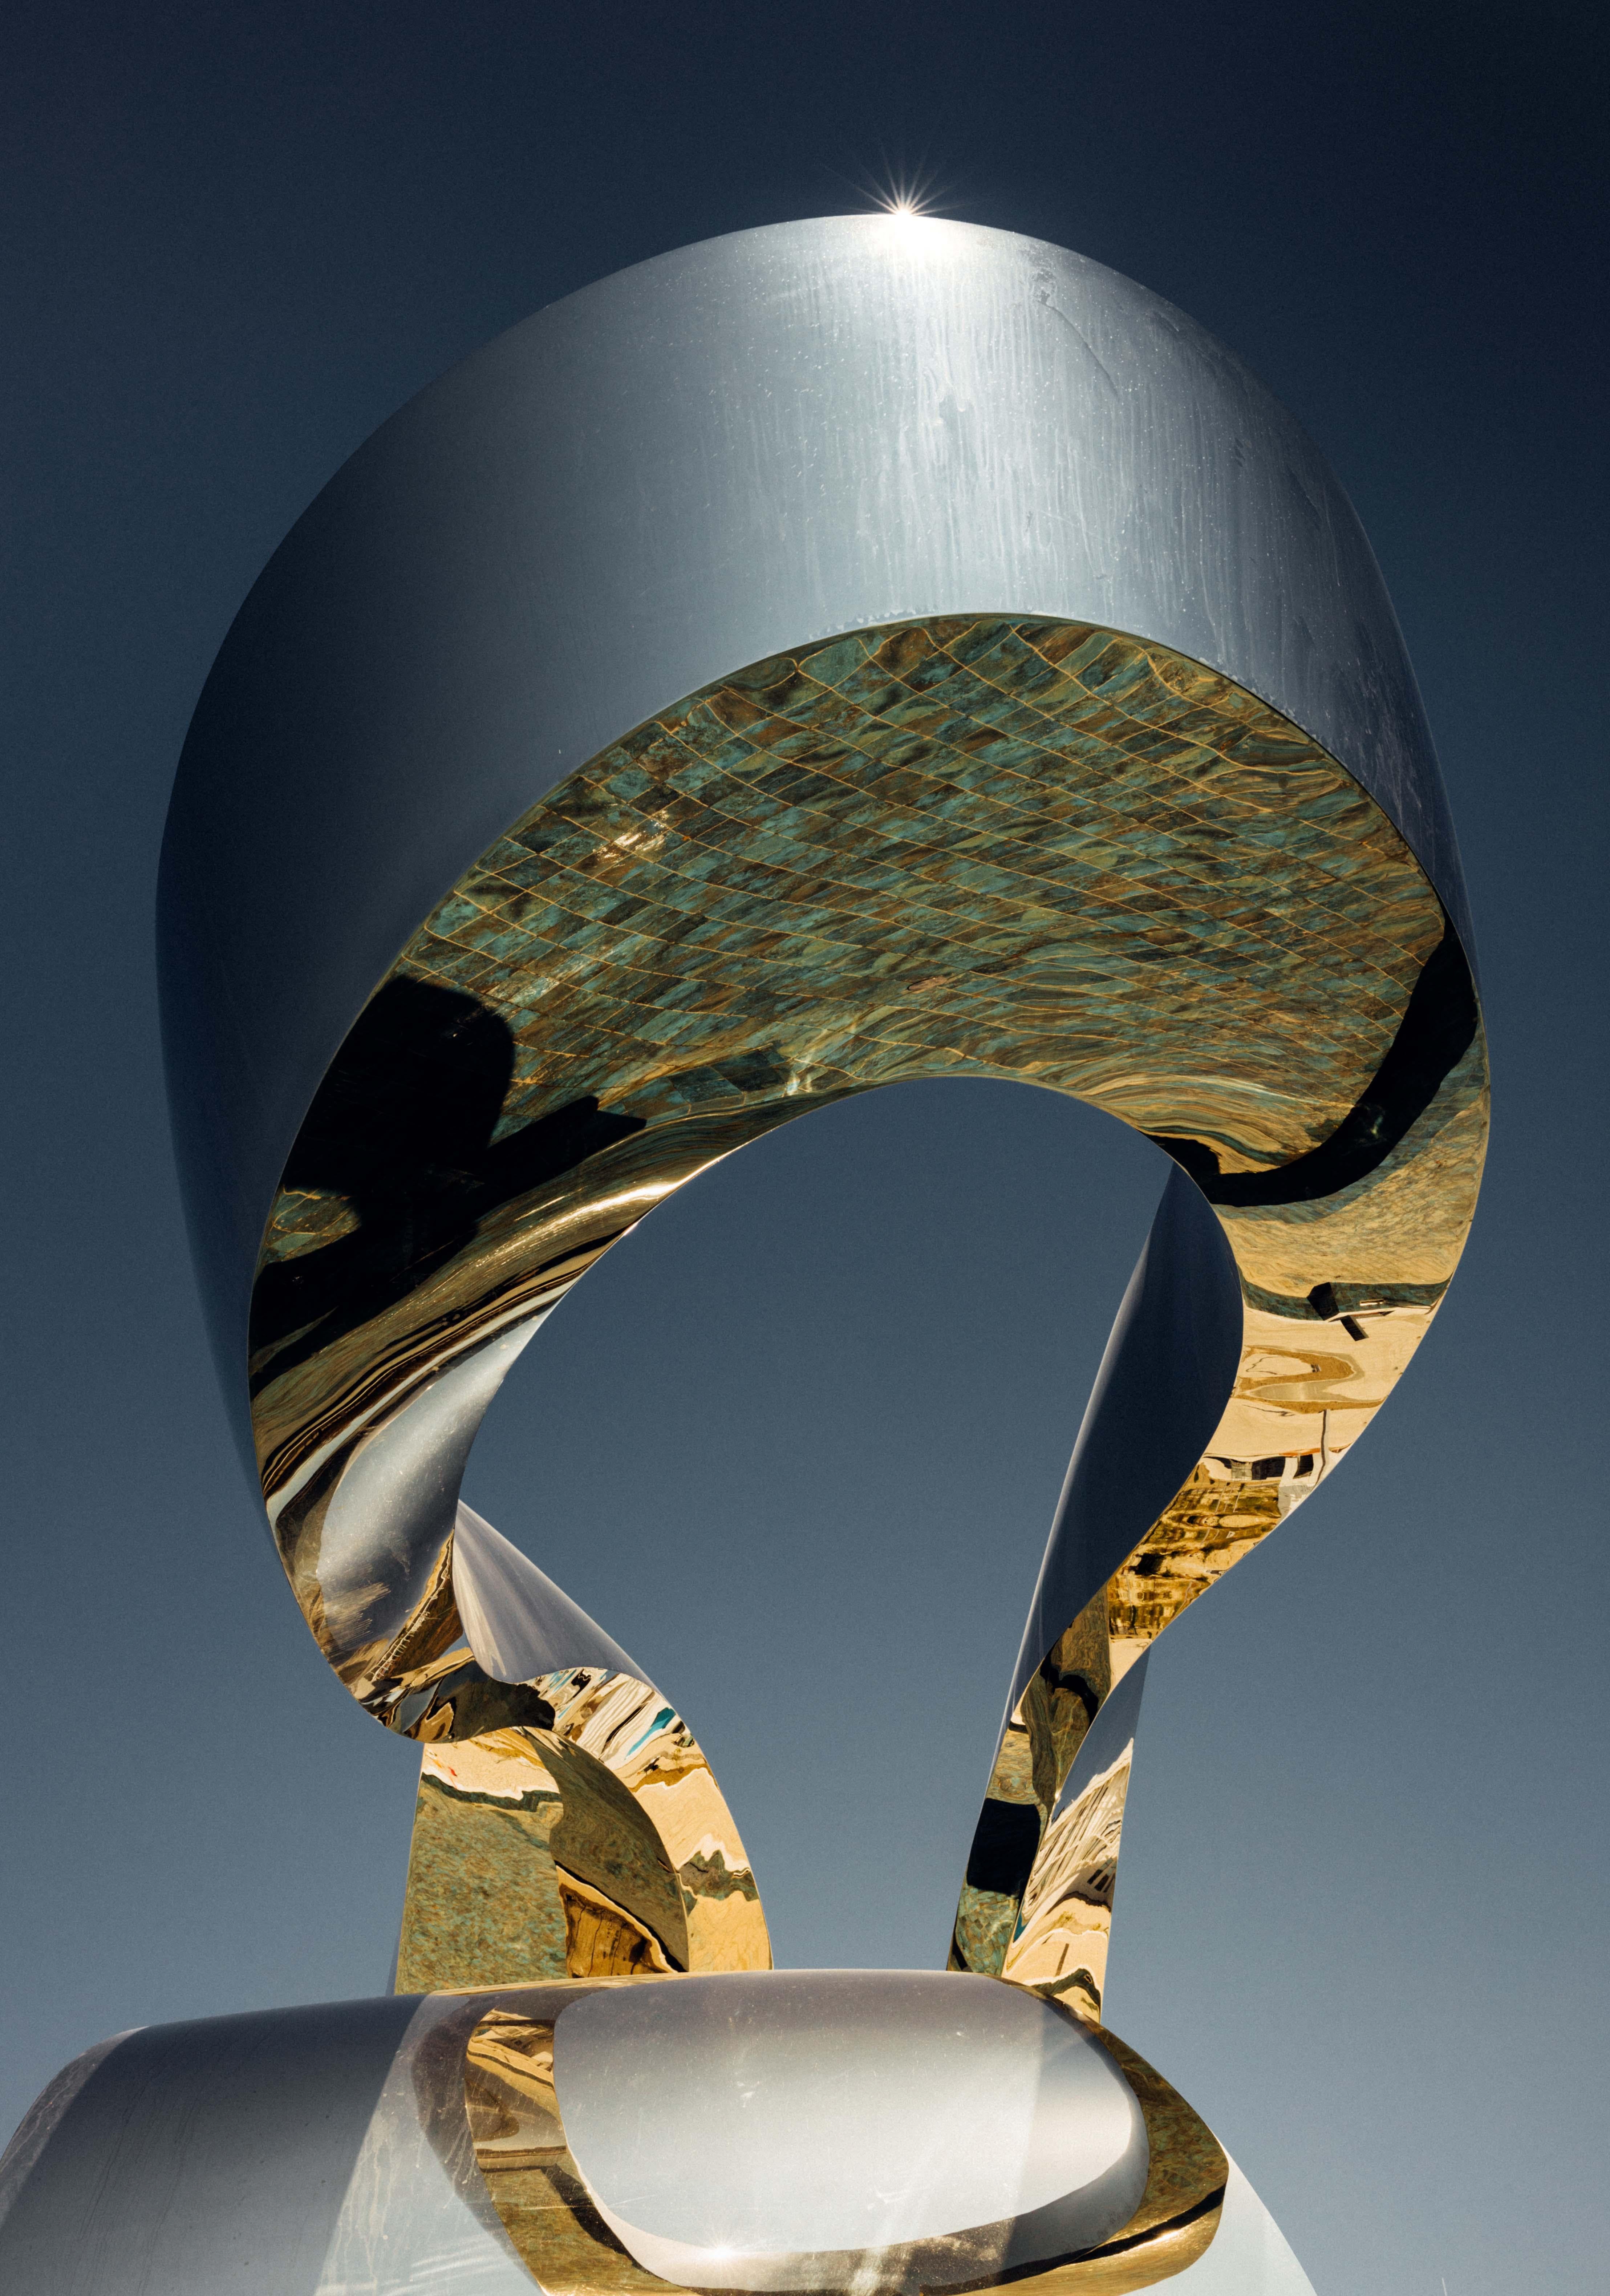 Zephyr Monumental SS 2/7 - abstract, polished stainless steel, outdoor sculpture For Sale 4